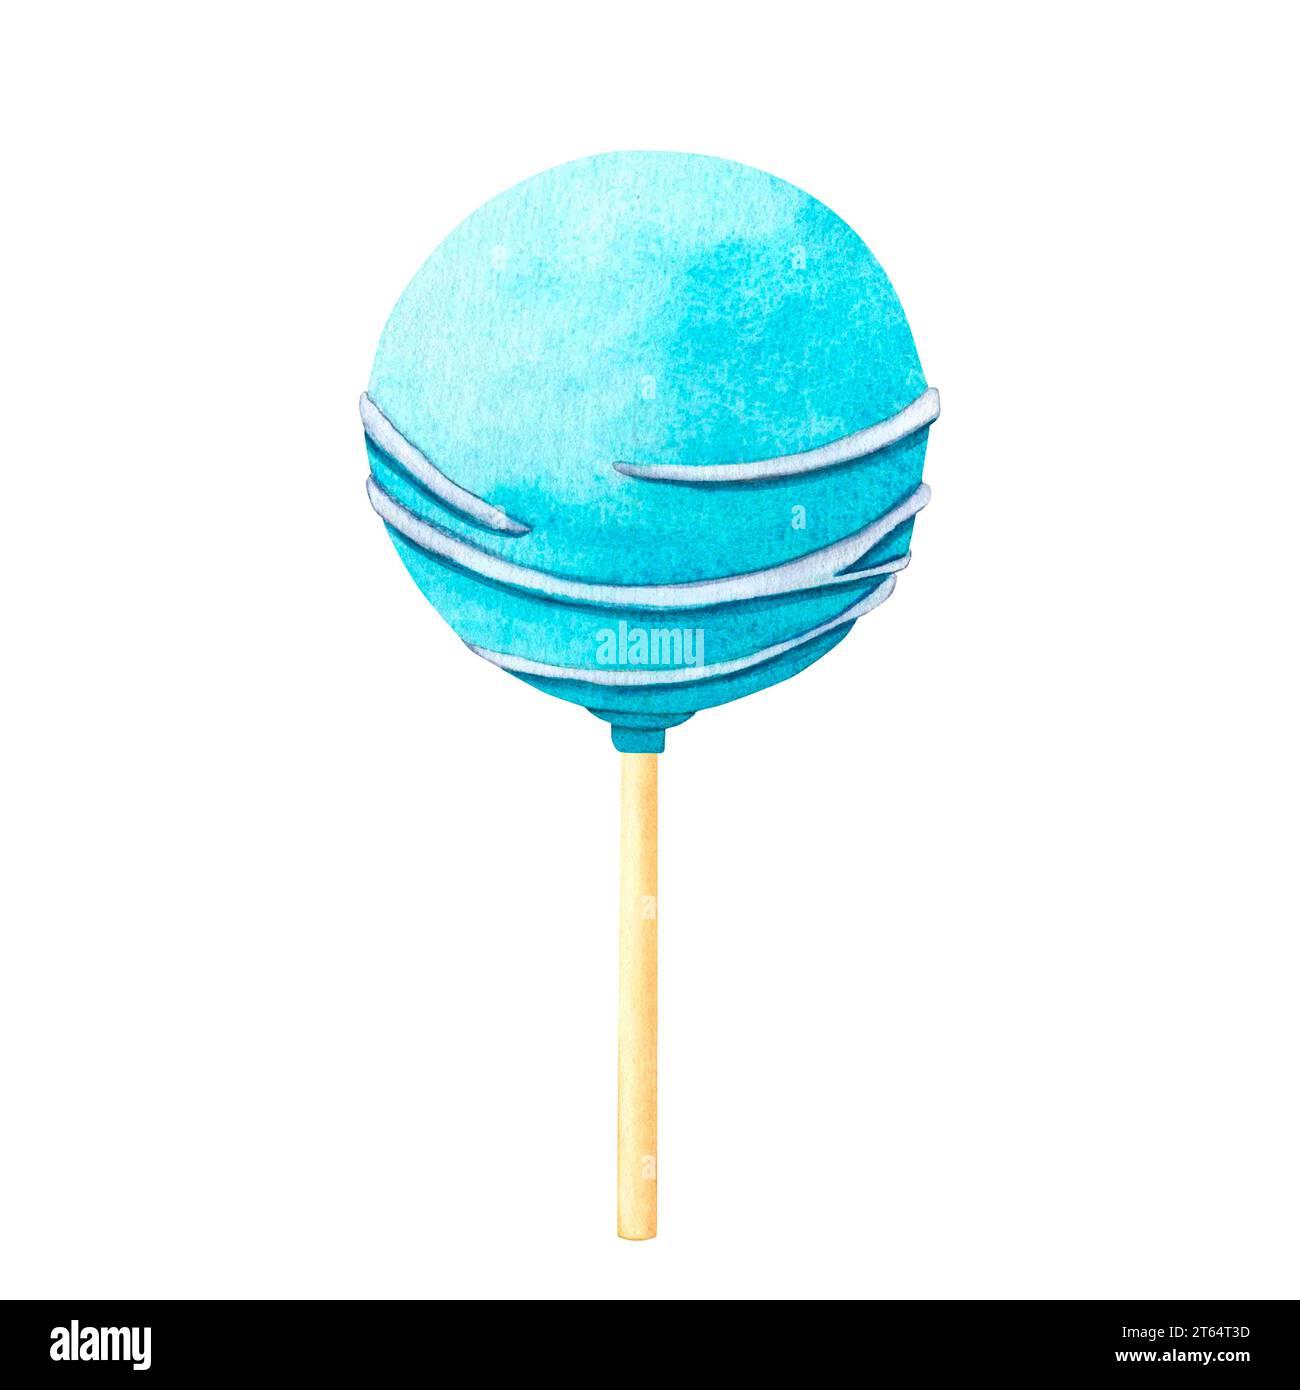 Cake on a stick, cake pops in blue glaze with confectionery striped. Watercolor illustration popsicle ice cream from set of sweets for decoration and Stock Photo